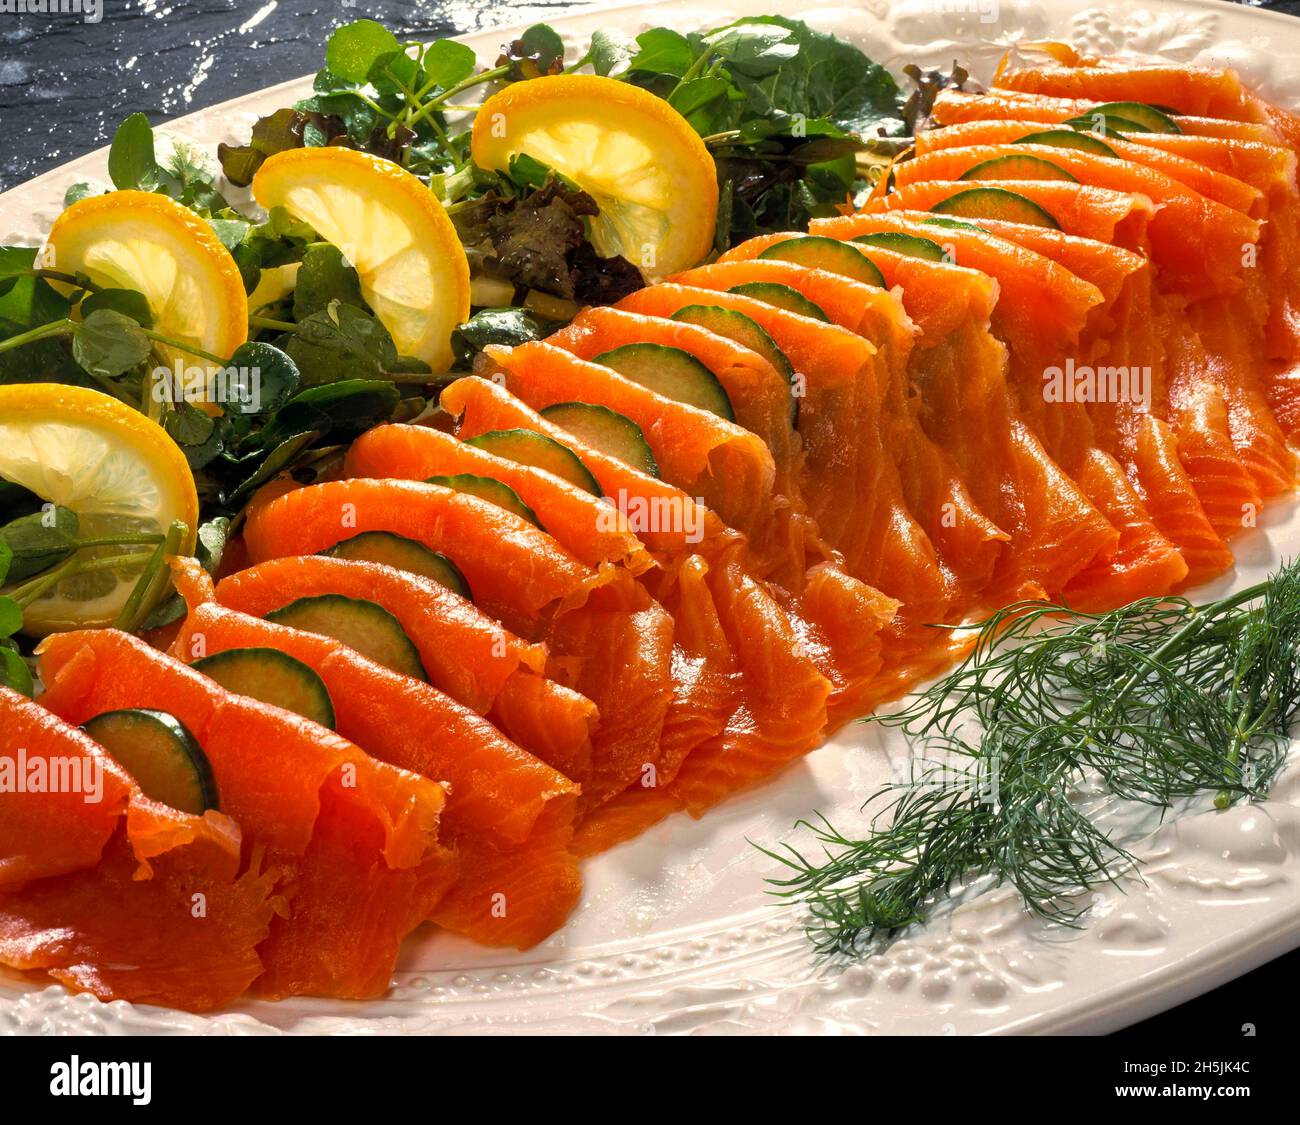 White Platter plate dish seafood smoked salmon slices fillet with lemon wedges fresh dill cucumber salad watercress Stock Photo